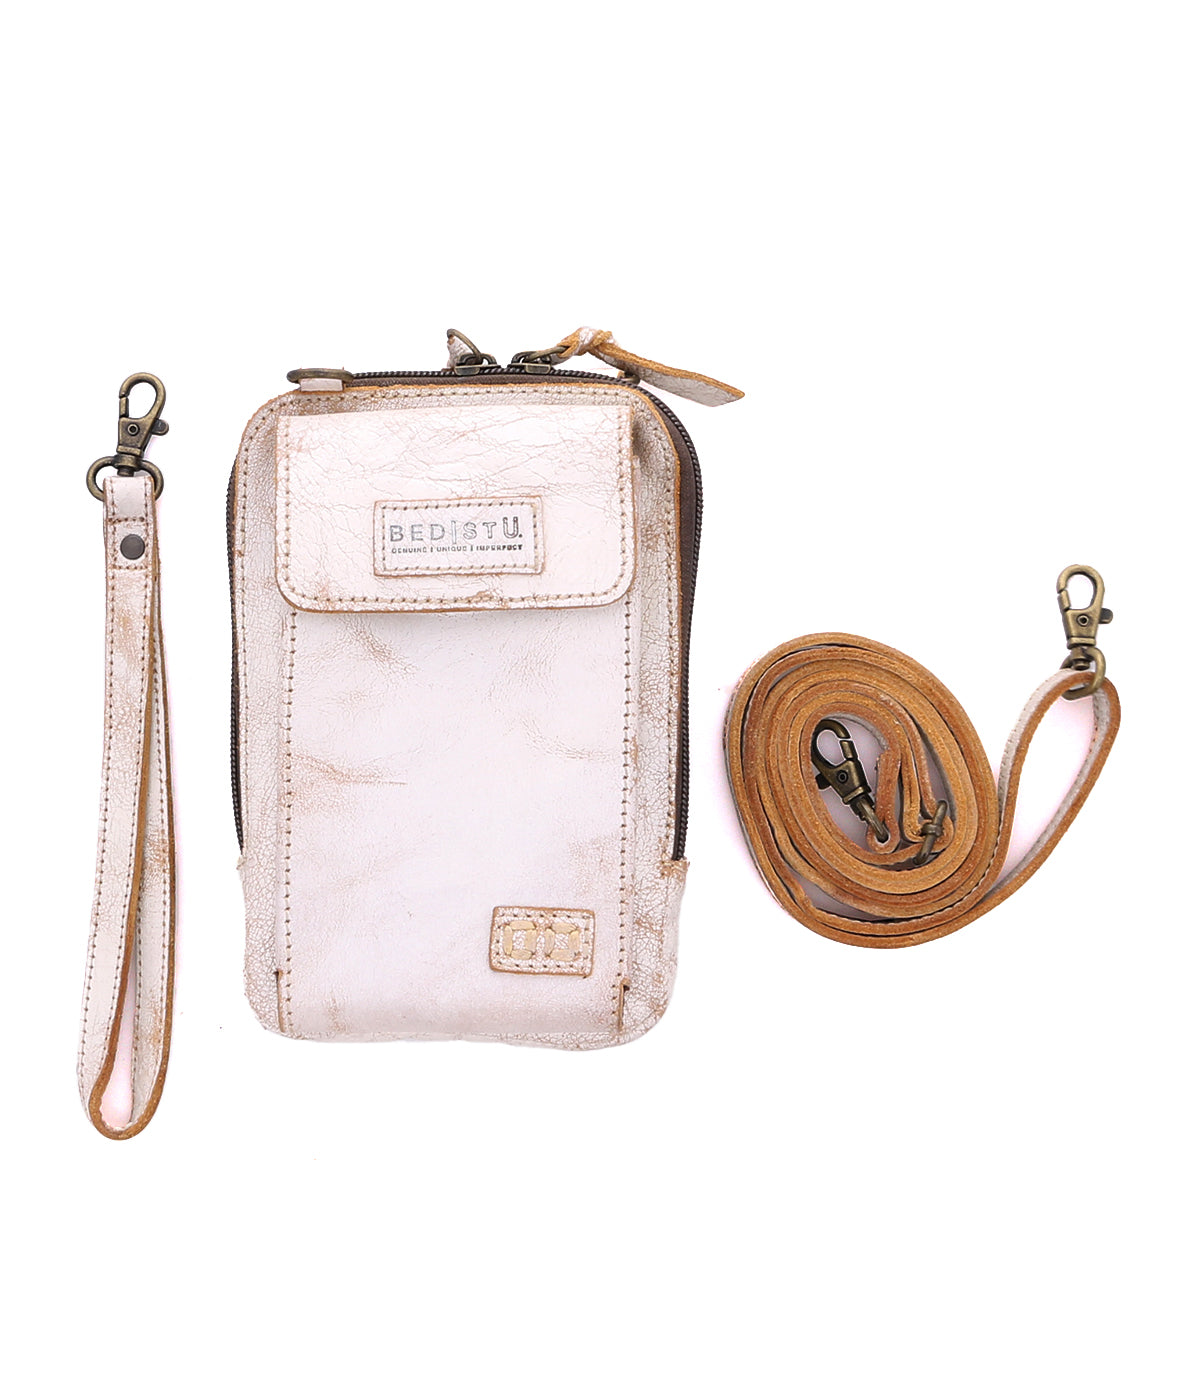 A premium Alelike purse with a Bed Stu leather strap.